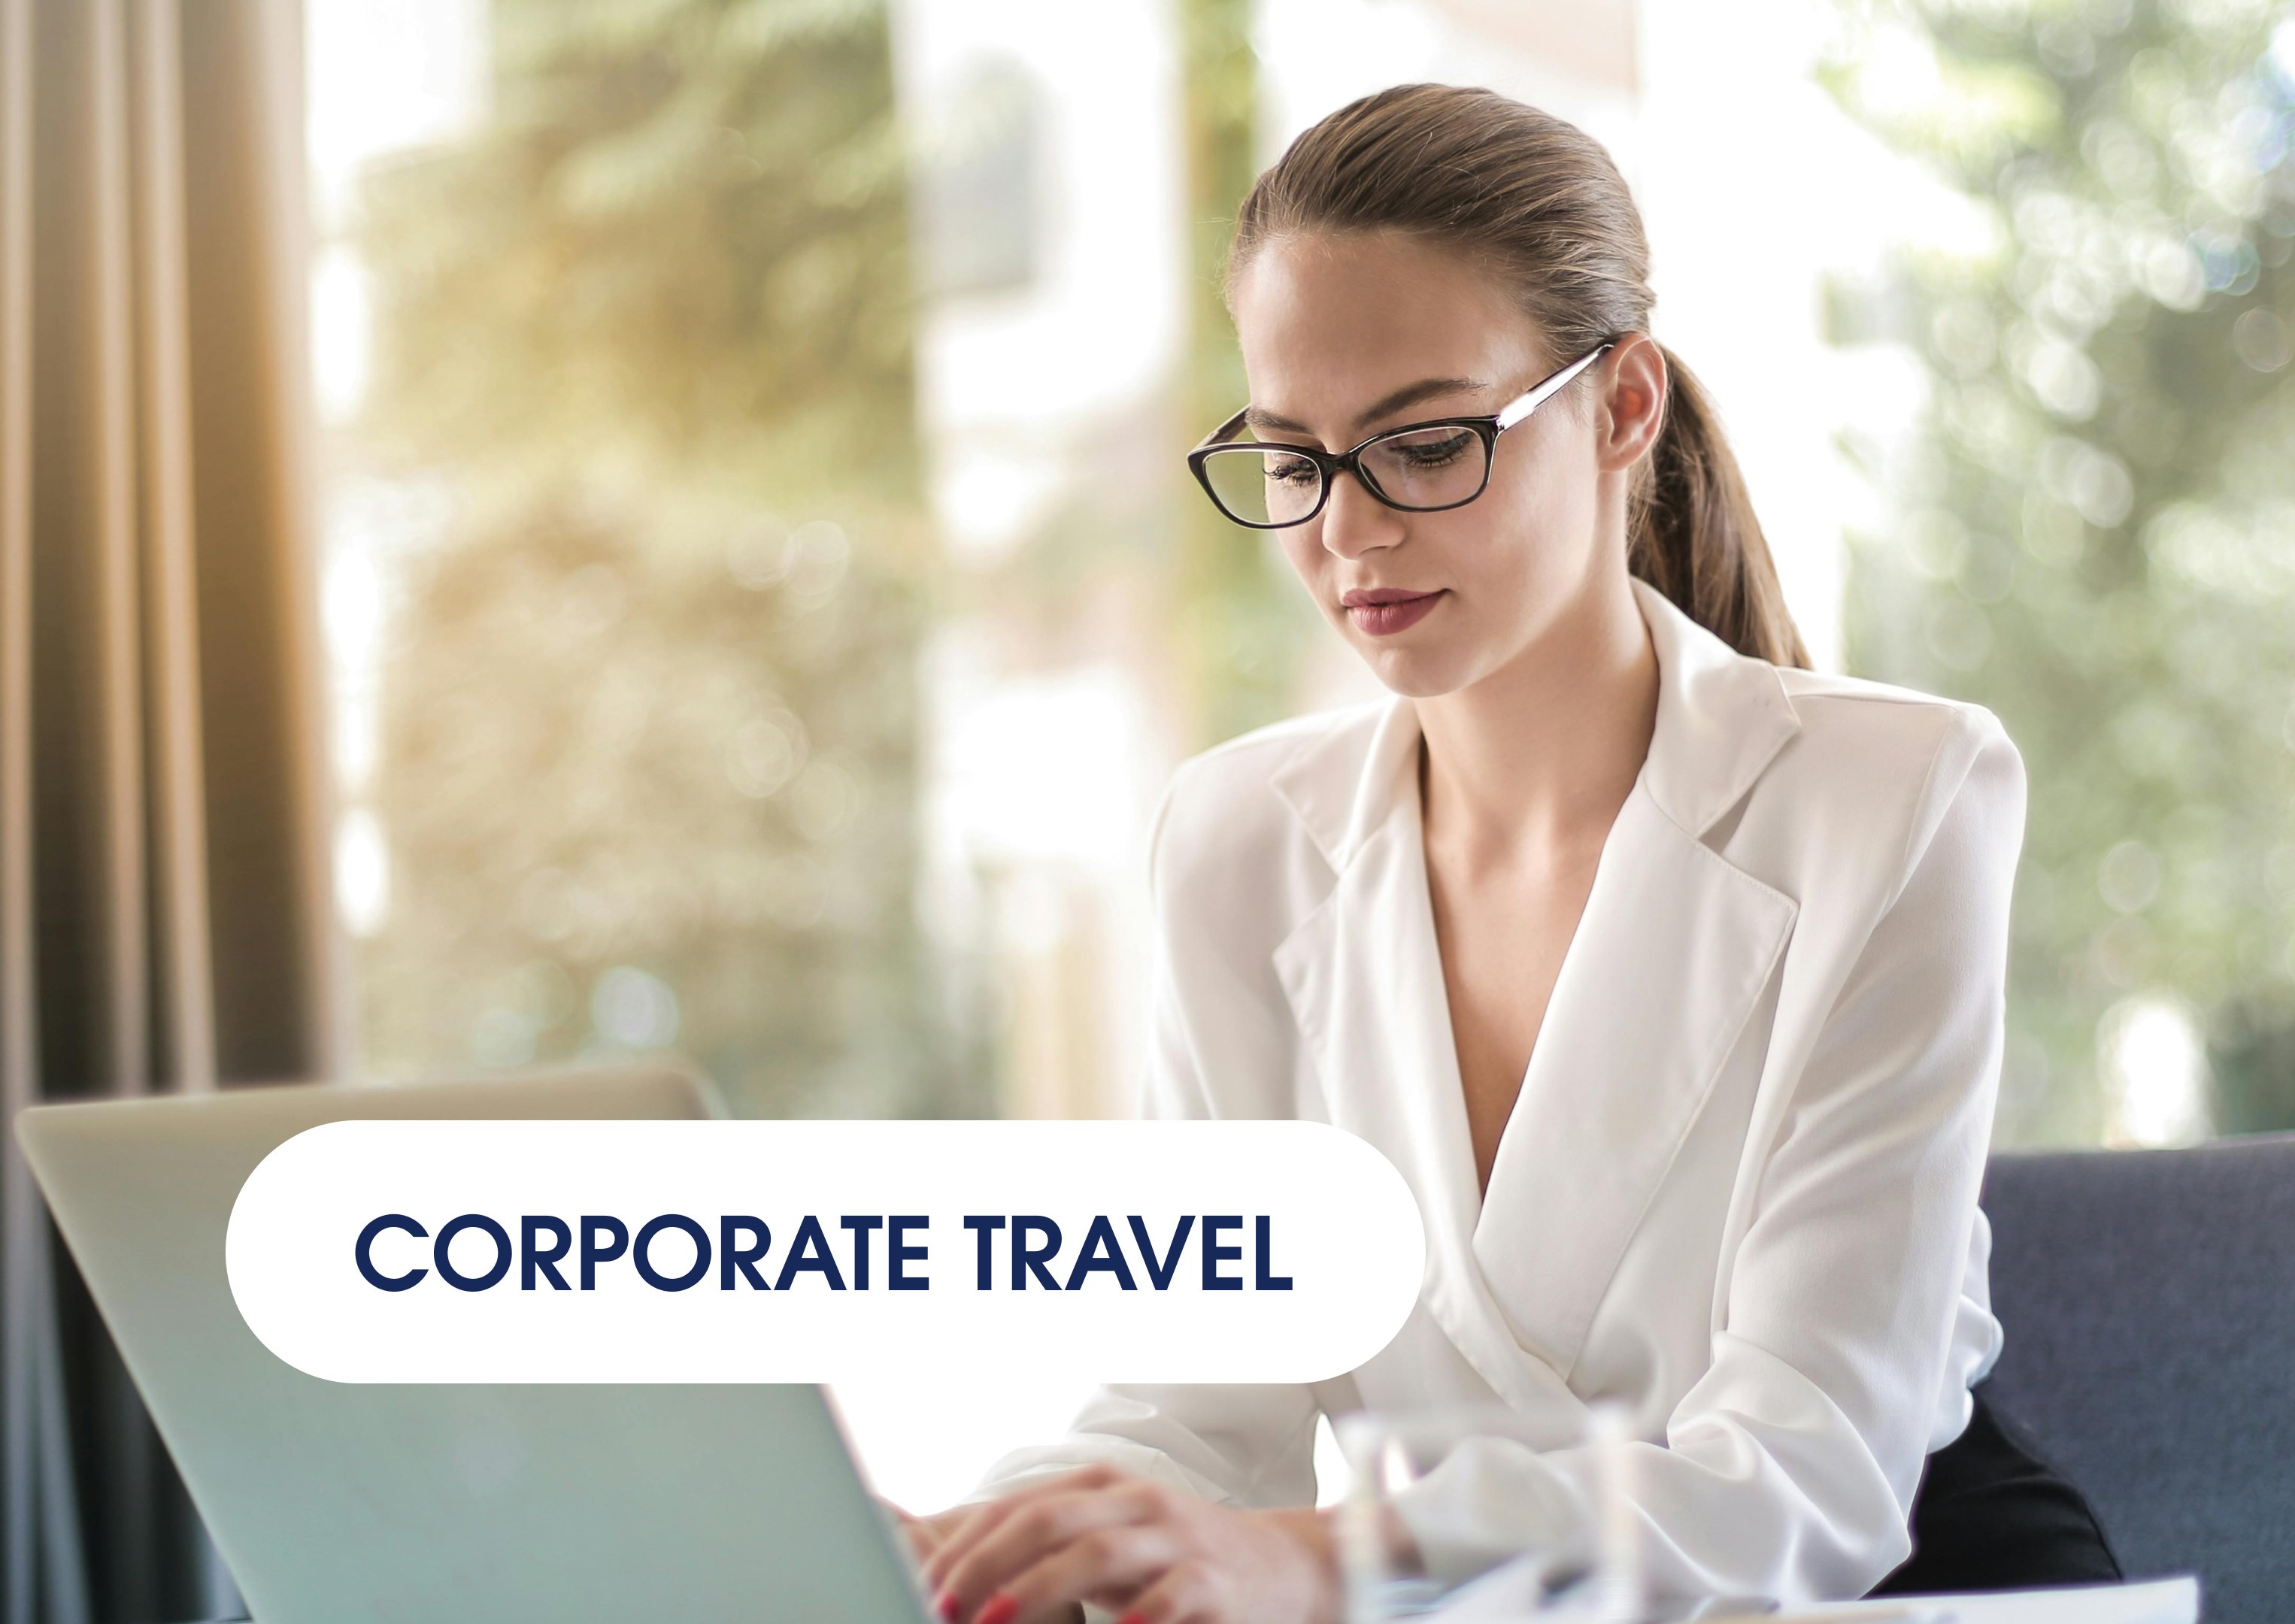 The Future of Corporate Travel: Smart, Safe & Sustainable Accommodation in Focus